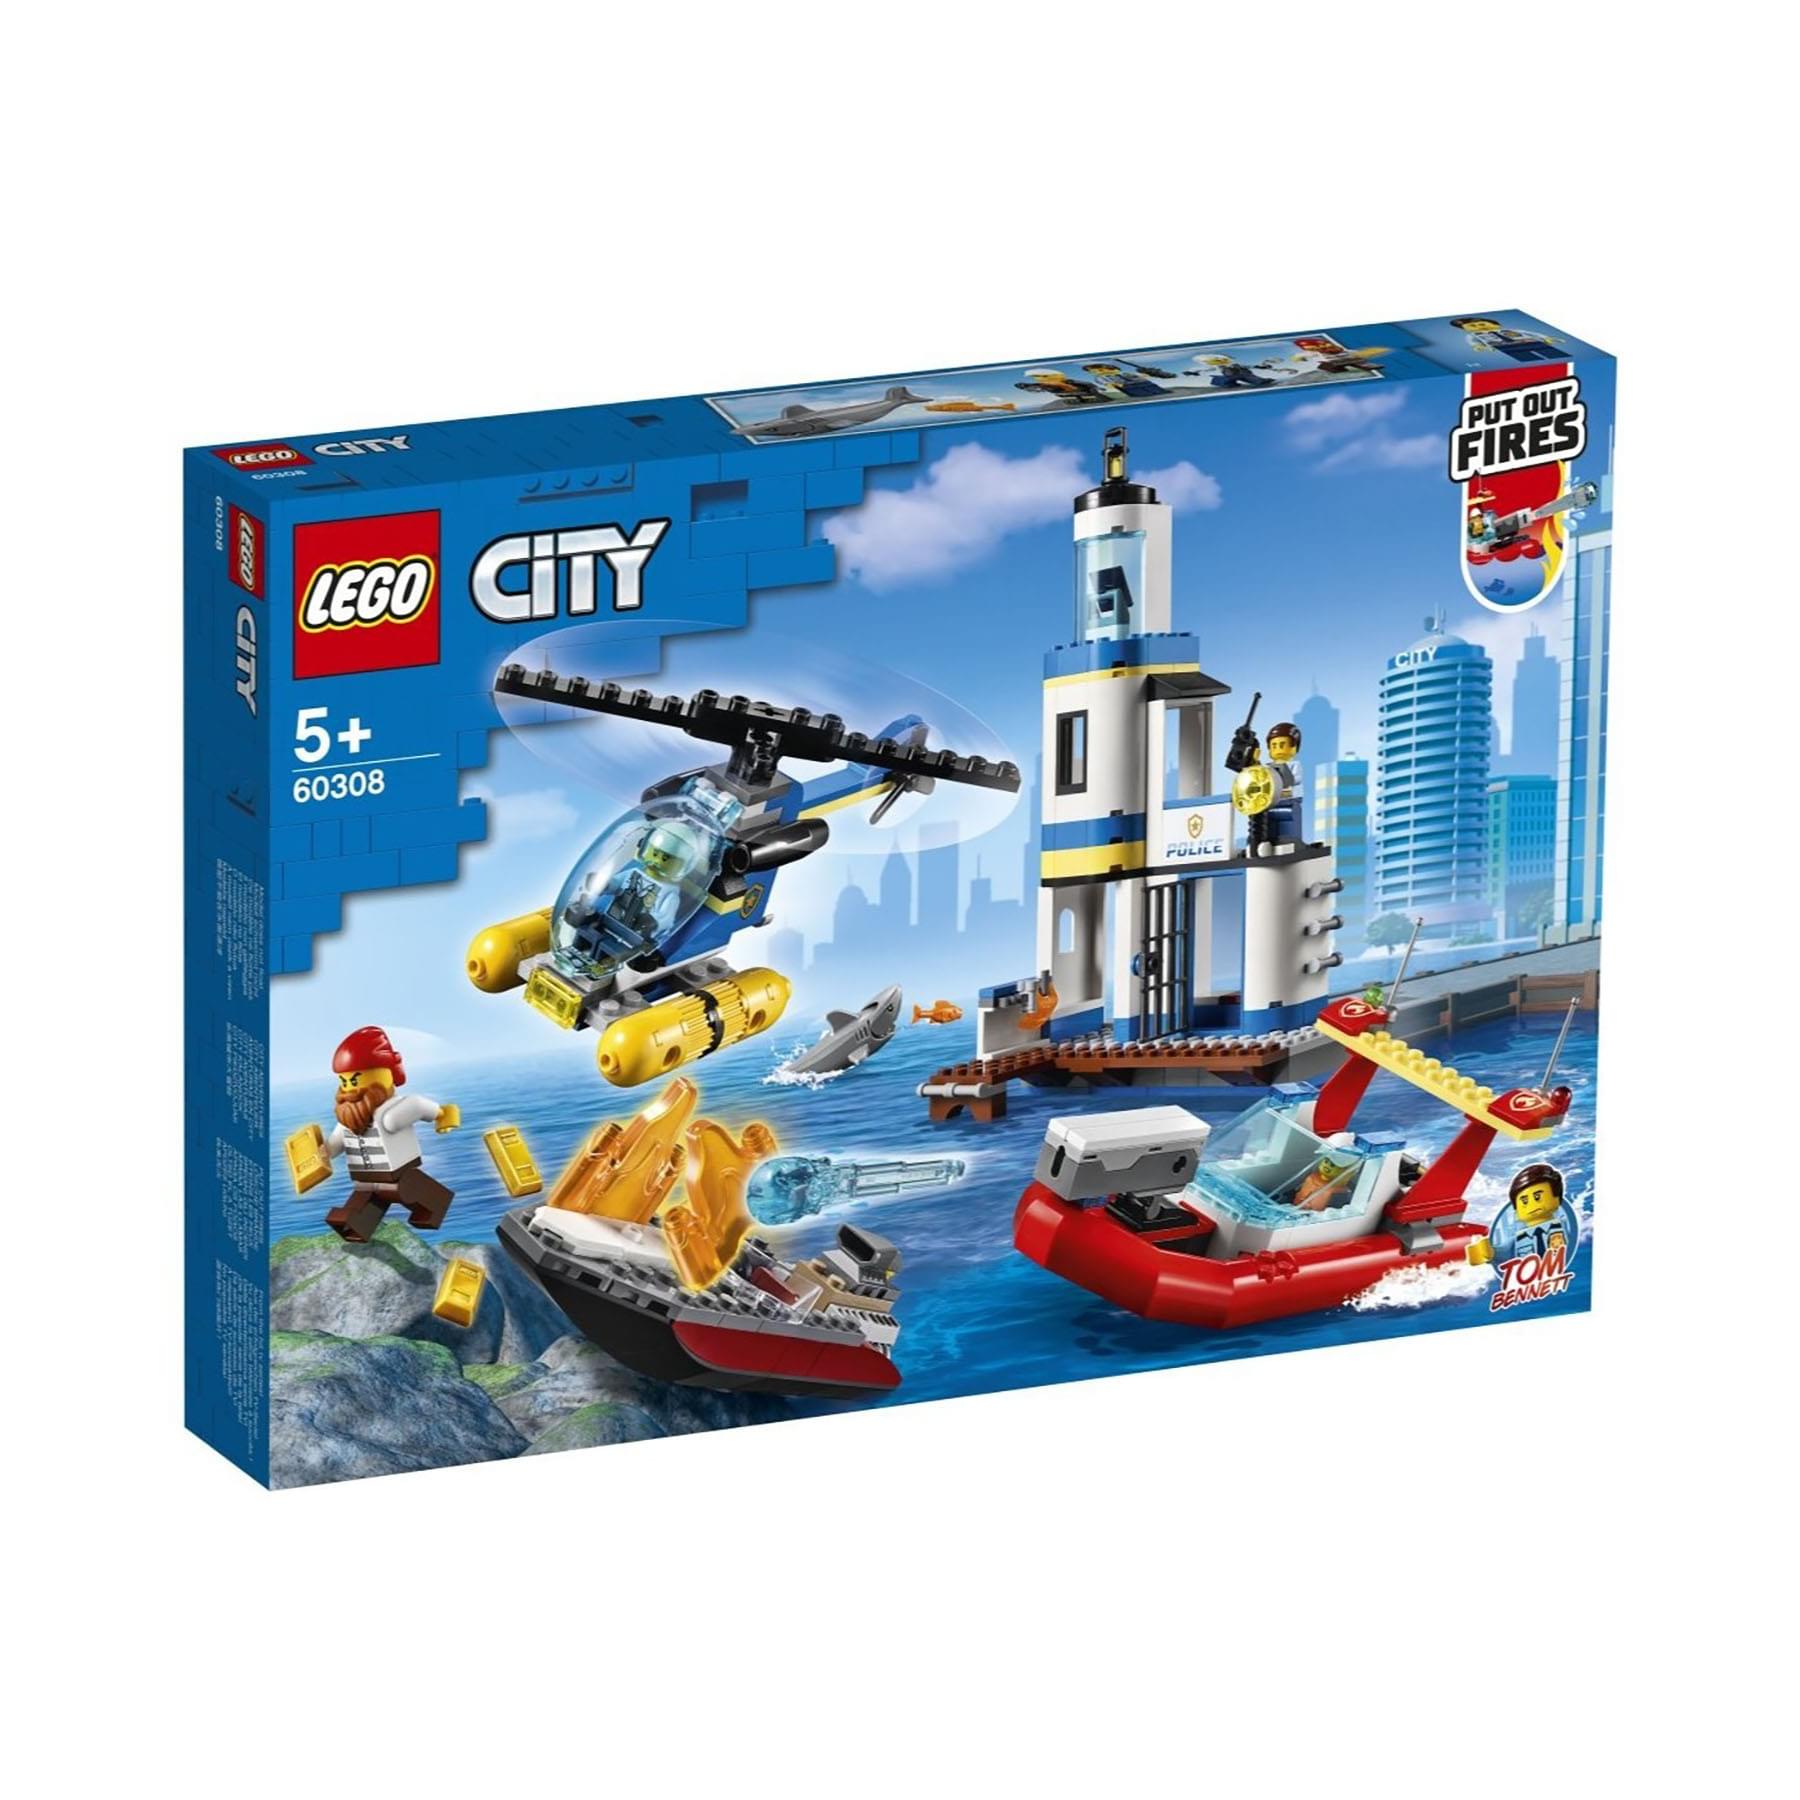 LEGO City 60308 Seaside Police and Fire Mission 297 Piece Building Kit